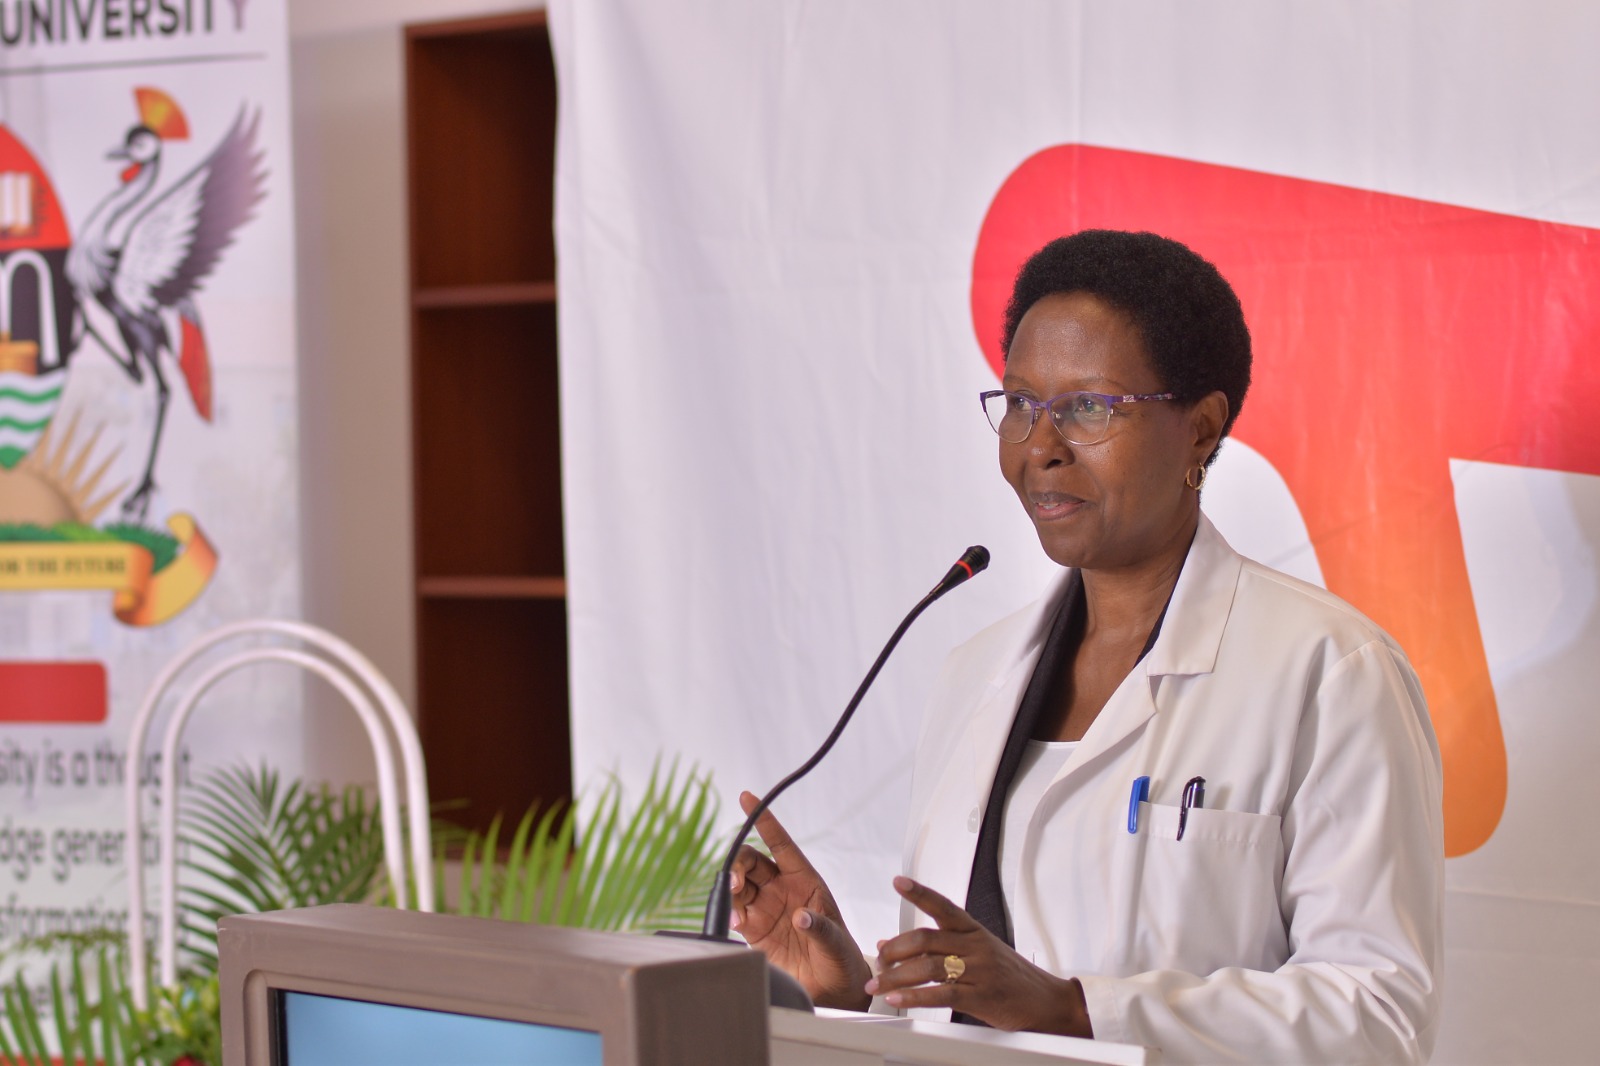 Ag Executive Director Addressing the congragation during the Launch of the Simulation Center At Mulago National Referral Hospital